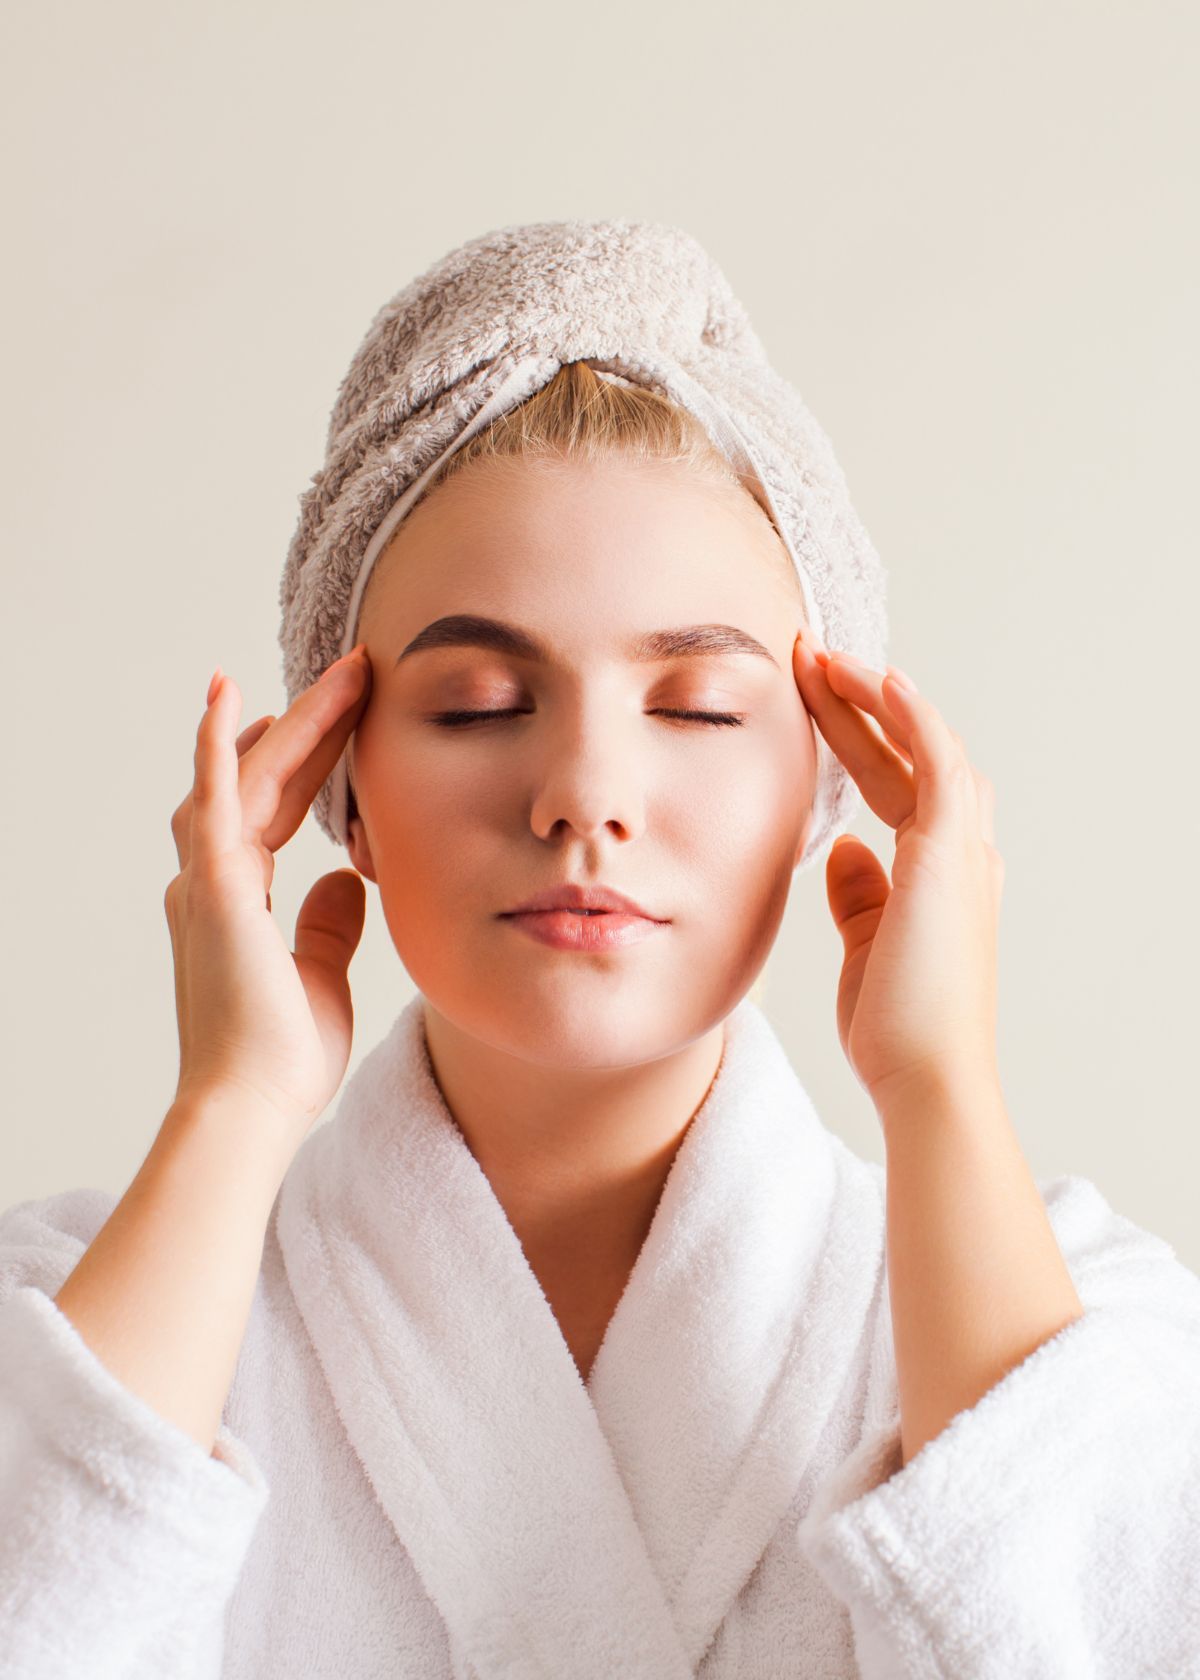 Rejuvenate Your Skin With These 5 Best Lotions For Face Massage!